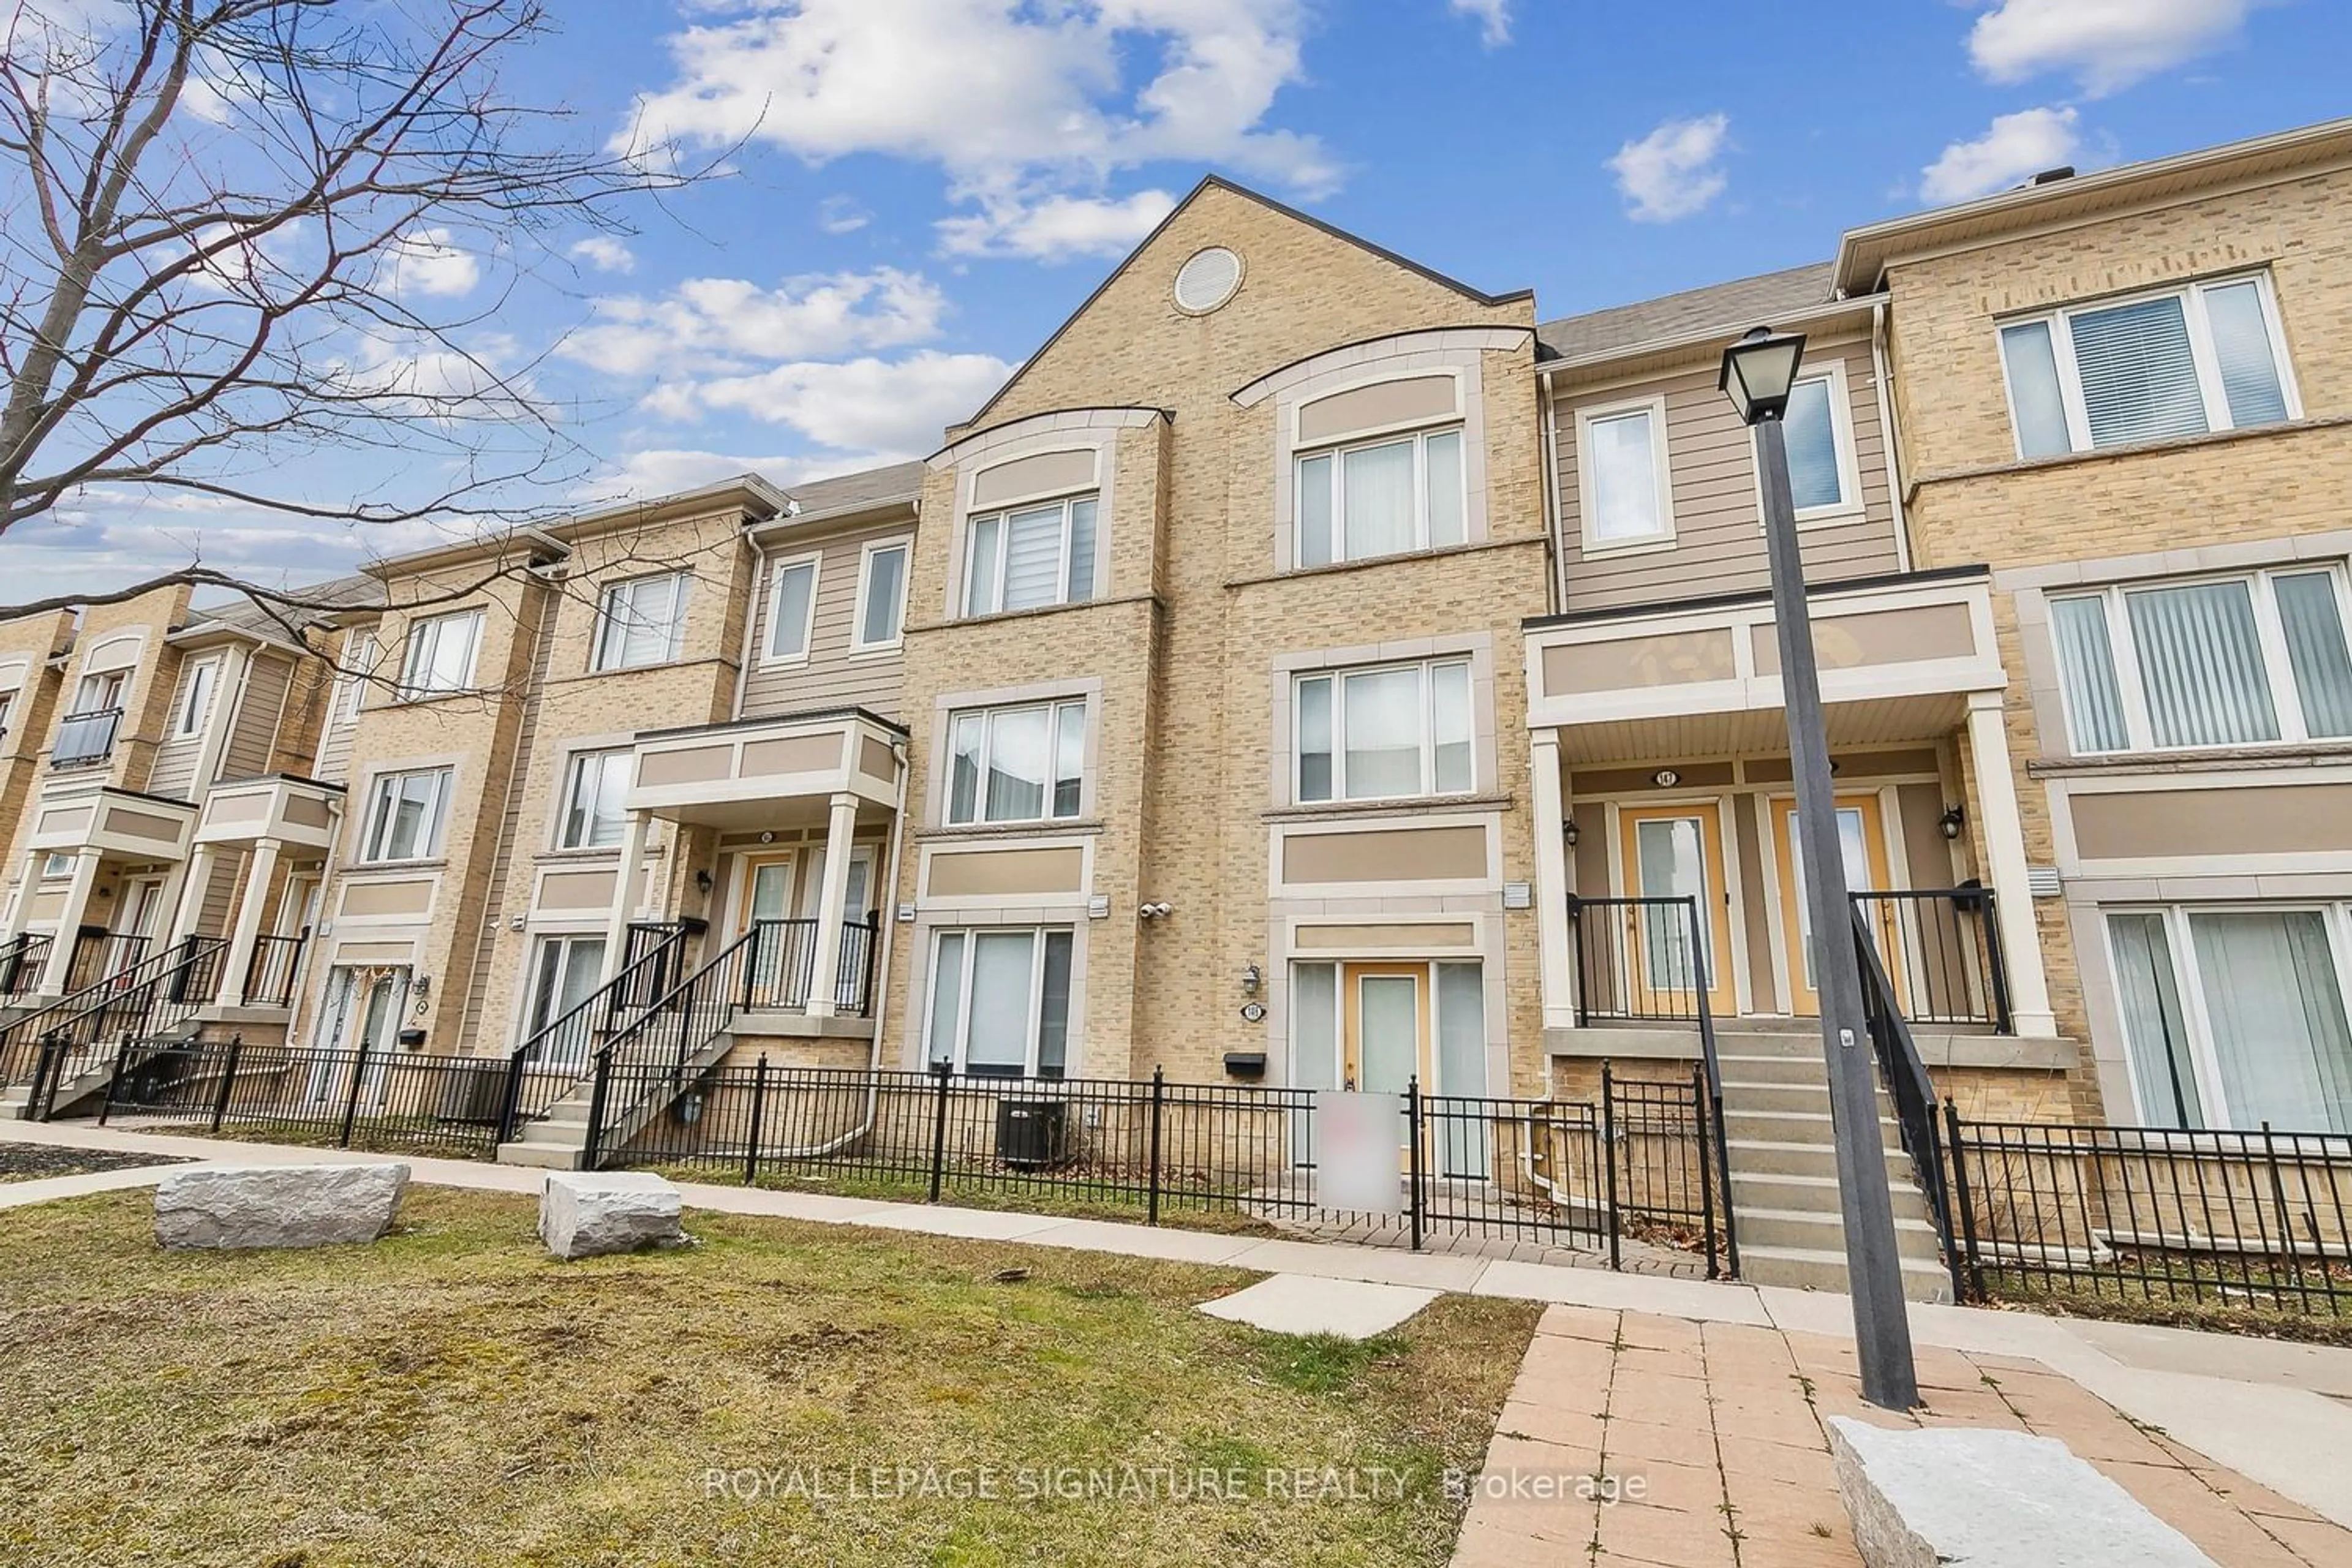 A pic from exterior of the house or condo for 60 Fairwood Circ #146, Brampton Ontario L6R 0Y6